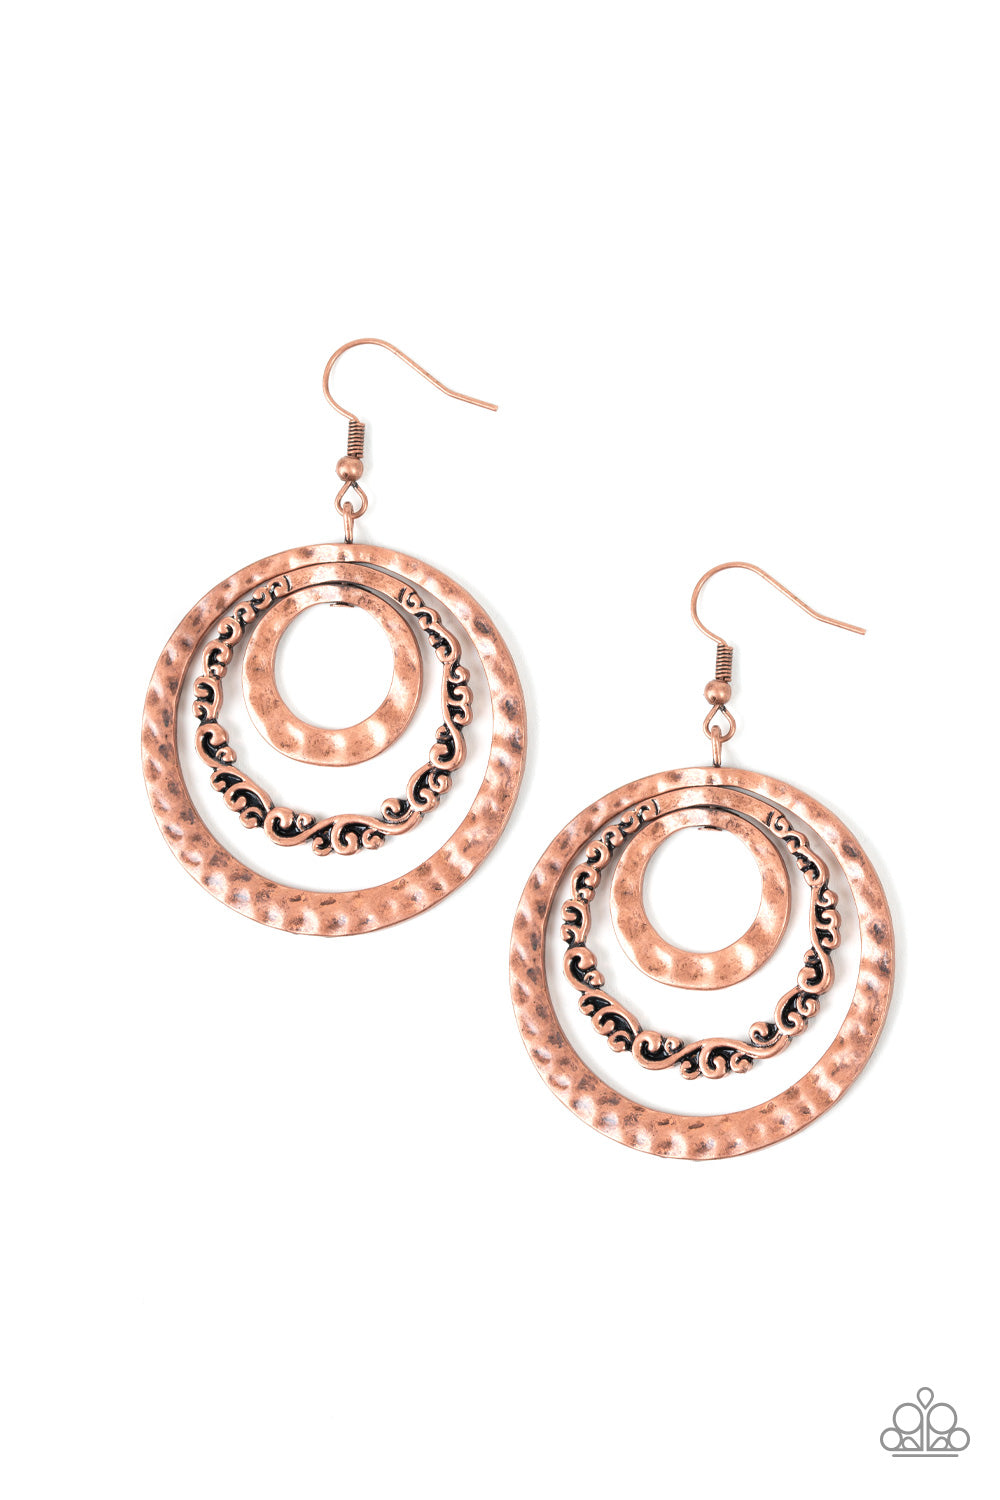 Out Of Control Shimmer Copper Paparazzi Earrings Cashmere Pink Jewels - Cashmere Pink Jewels & Accessories, Cashmere Pink Jewels & Accessories - Paparazzi